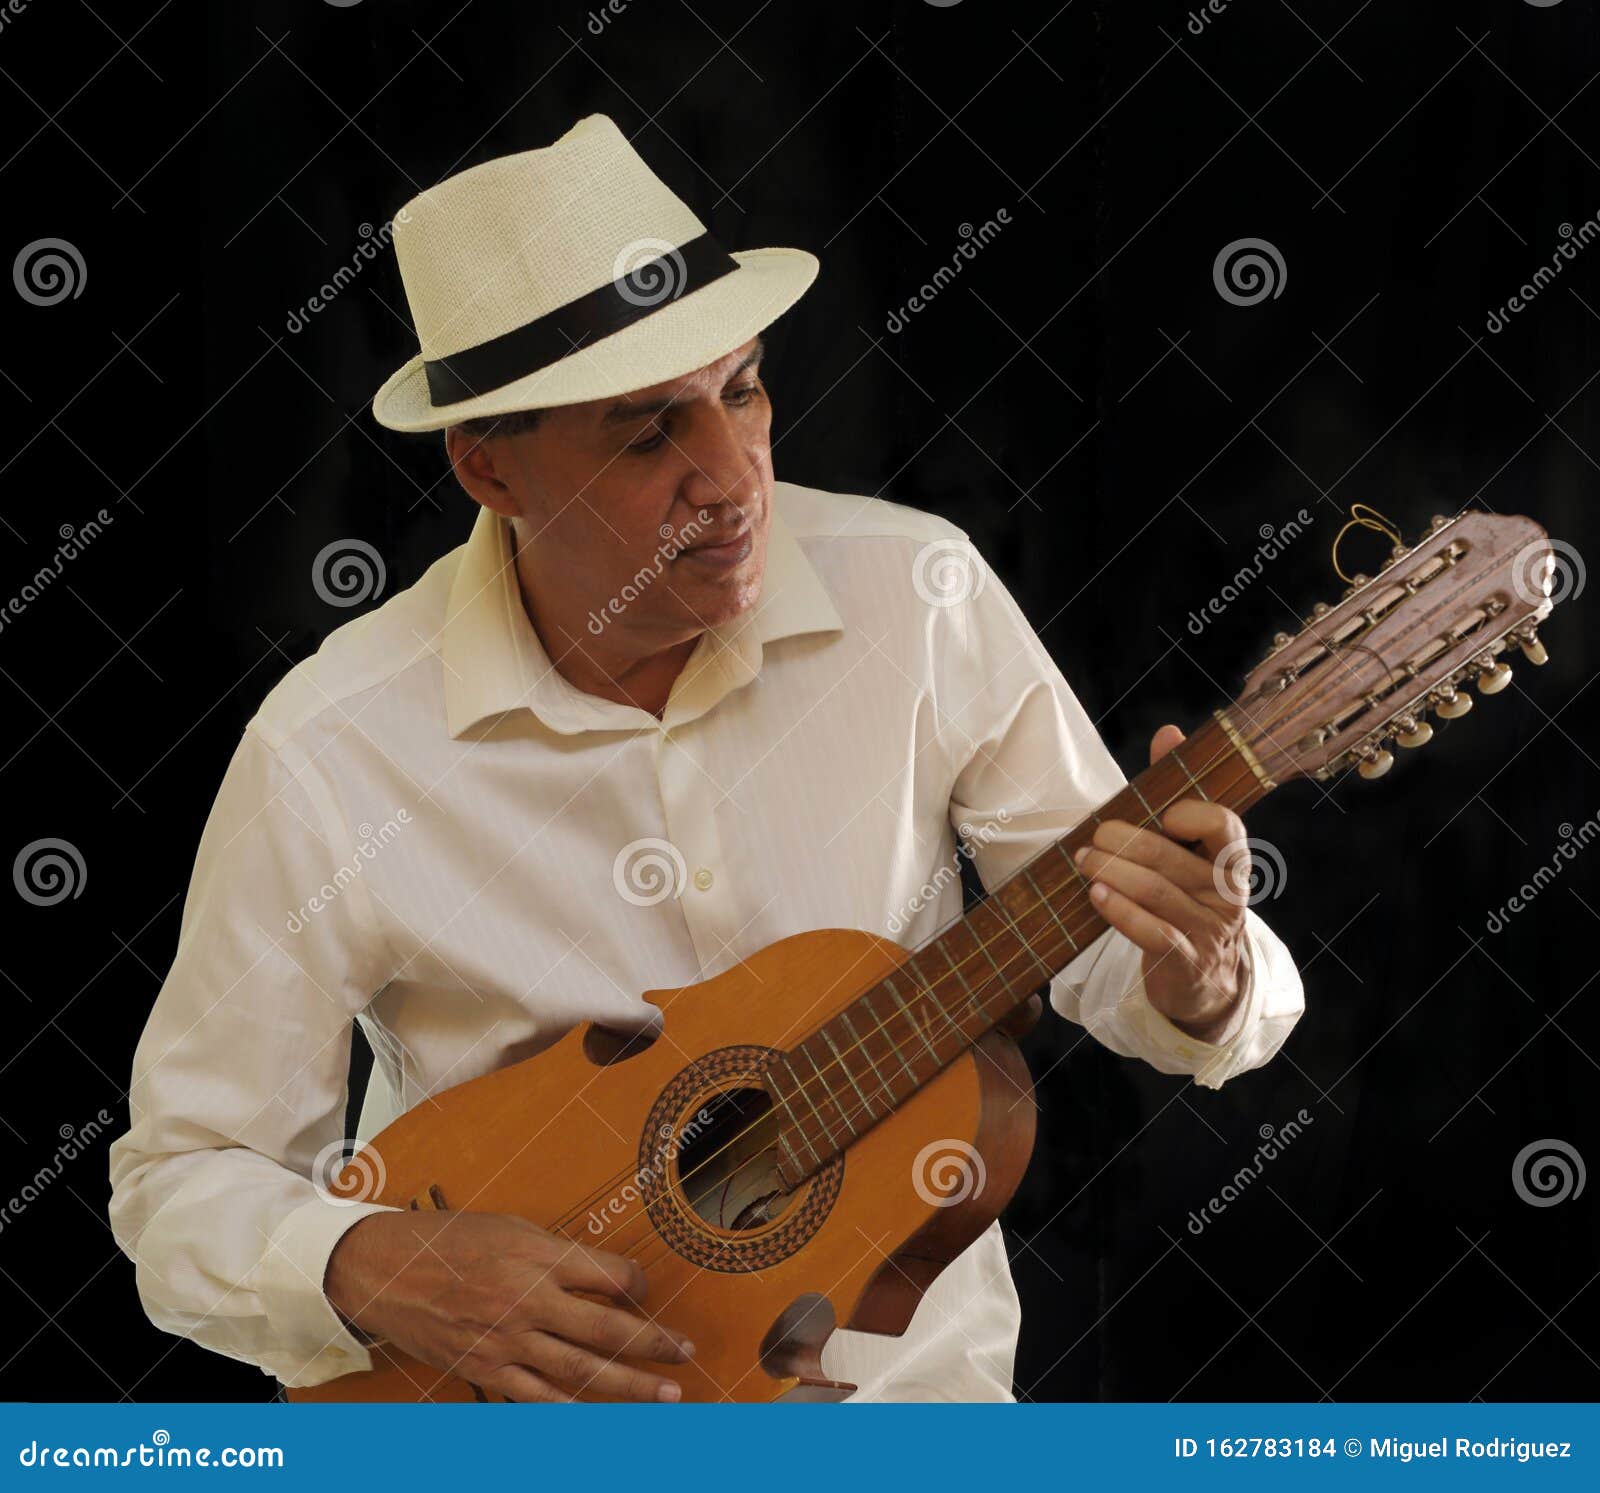 puerto rico cuatro player with a panama hat.